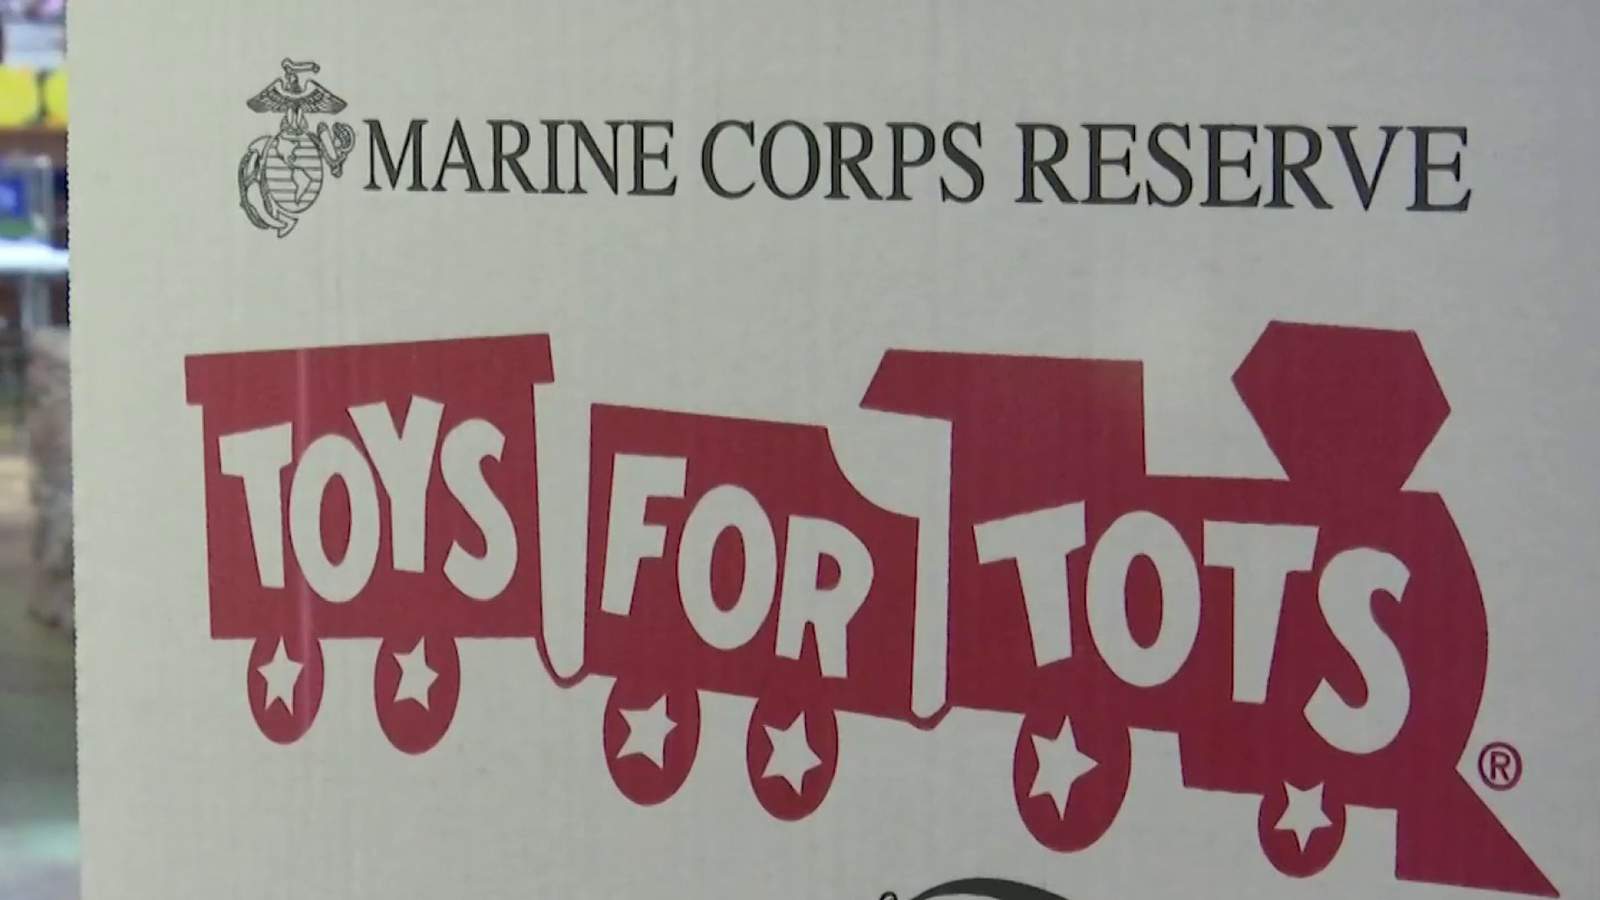 ‘They’re stealing from children:’ Toys for Tots donation boxes stolen in Ocala